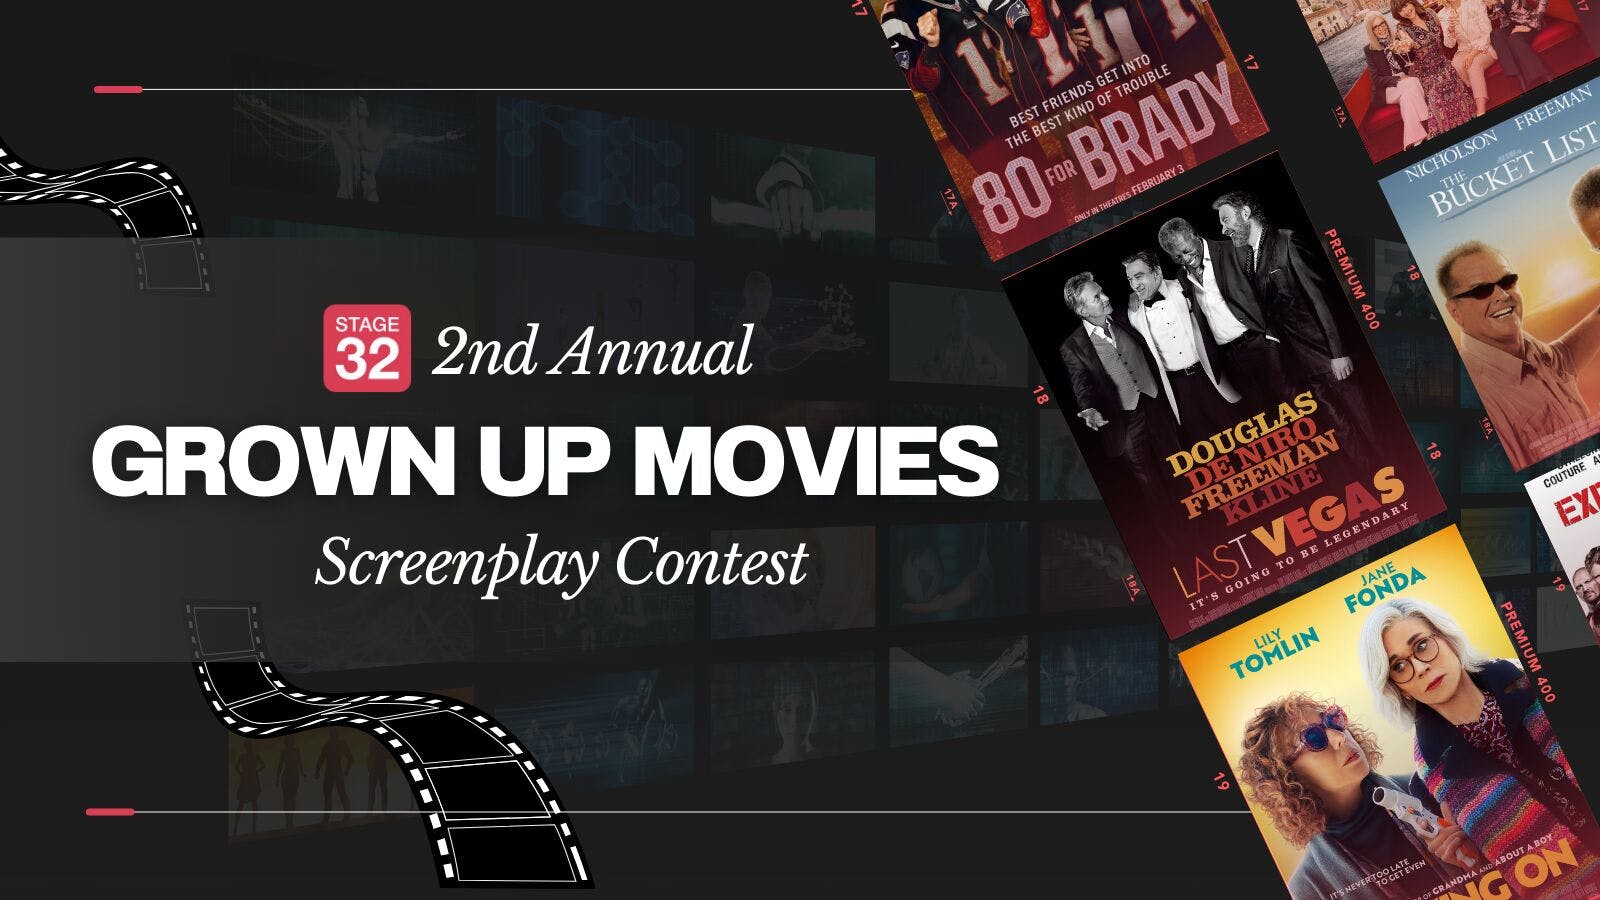 Announcing the 2nd Annual Grown Up Movies Screenplay Contest